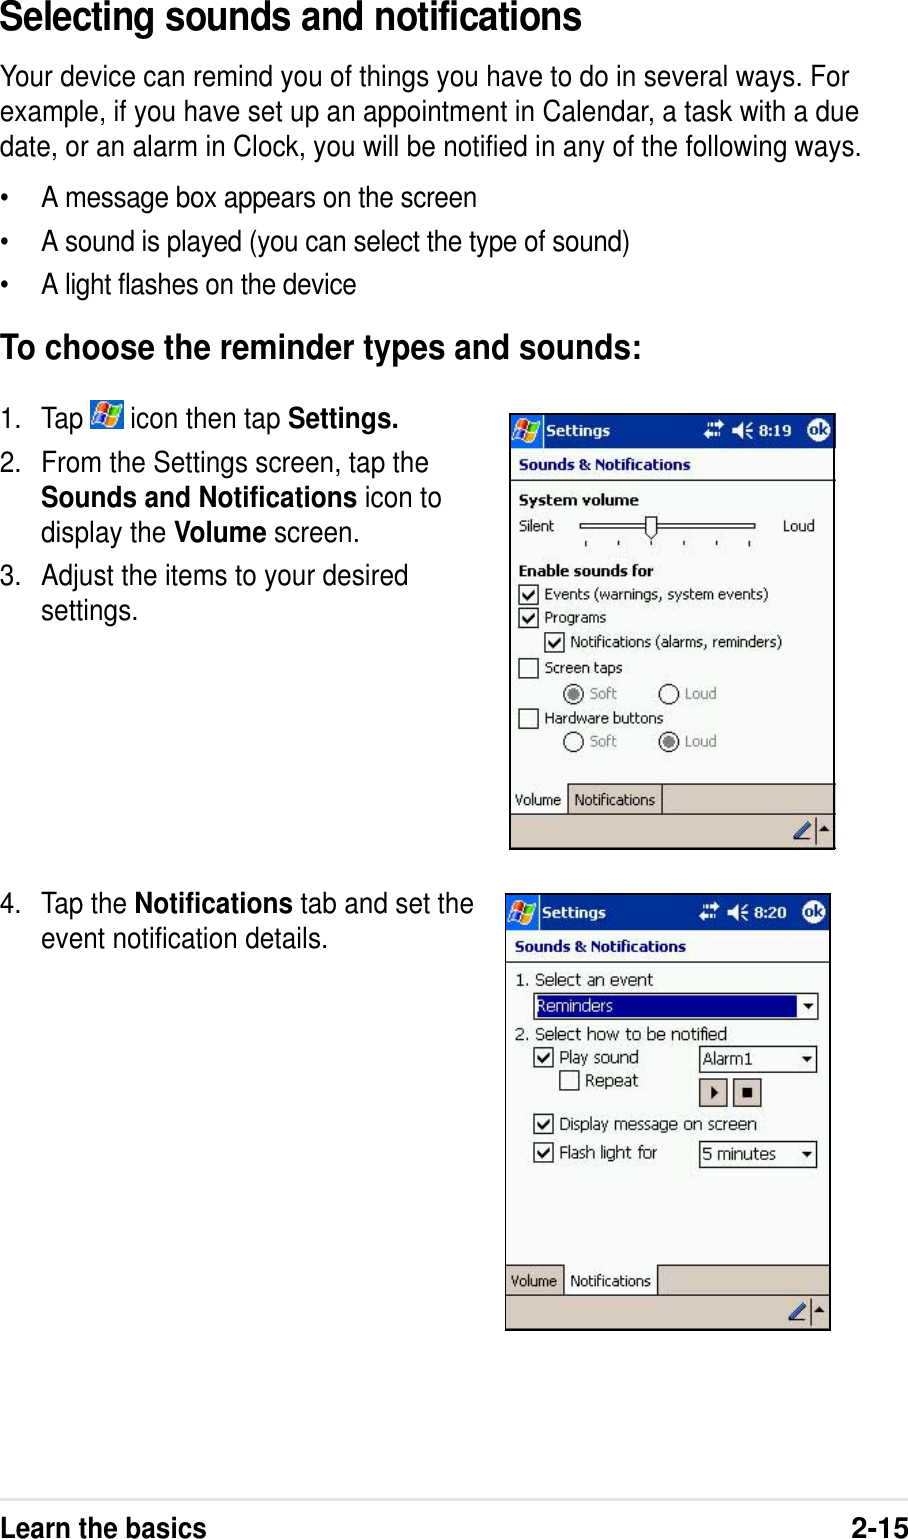 Learn the basics2-15Selecting sounds and notificationsYour device can remind you of things you have to do in several ways. Forexample, if you have set up an appointment in Calendar, a task with a duedate, or an alarm in Clock, you will be notified in any of the following ways.•A message box appears on the screen•A sound is played (you can select the type of sound)•A light flashes on the deviceTo choose the reminder types and sounds:1. Tap   icon then tap Settings.2. From the Settings screen, tap theSounds and Notifications icon todisplay the Volume screen.3. Adjust the items to your desiredsettings.4. Tap the Notifications tab and set theevent notification details.